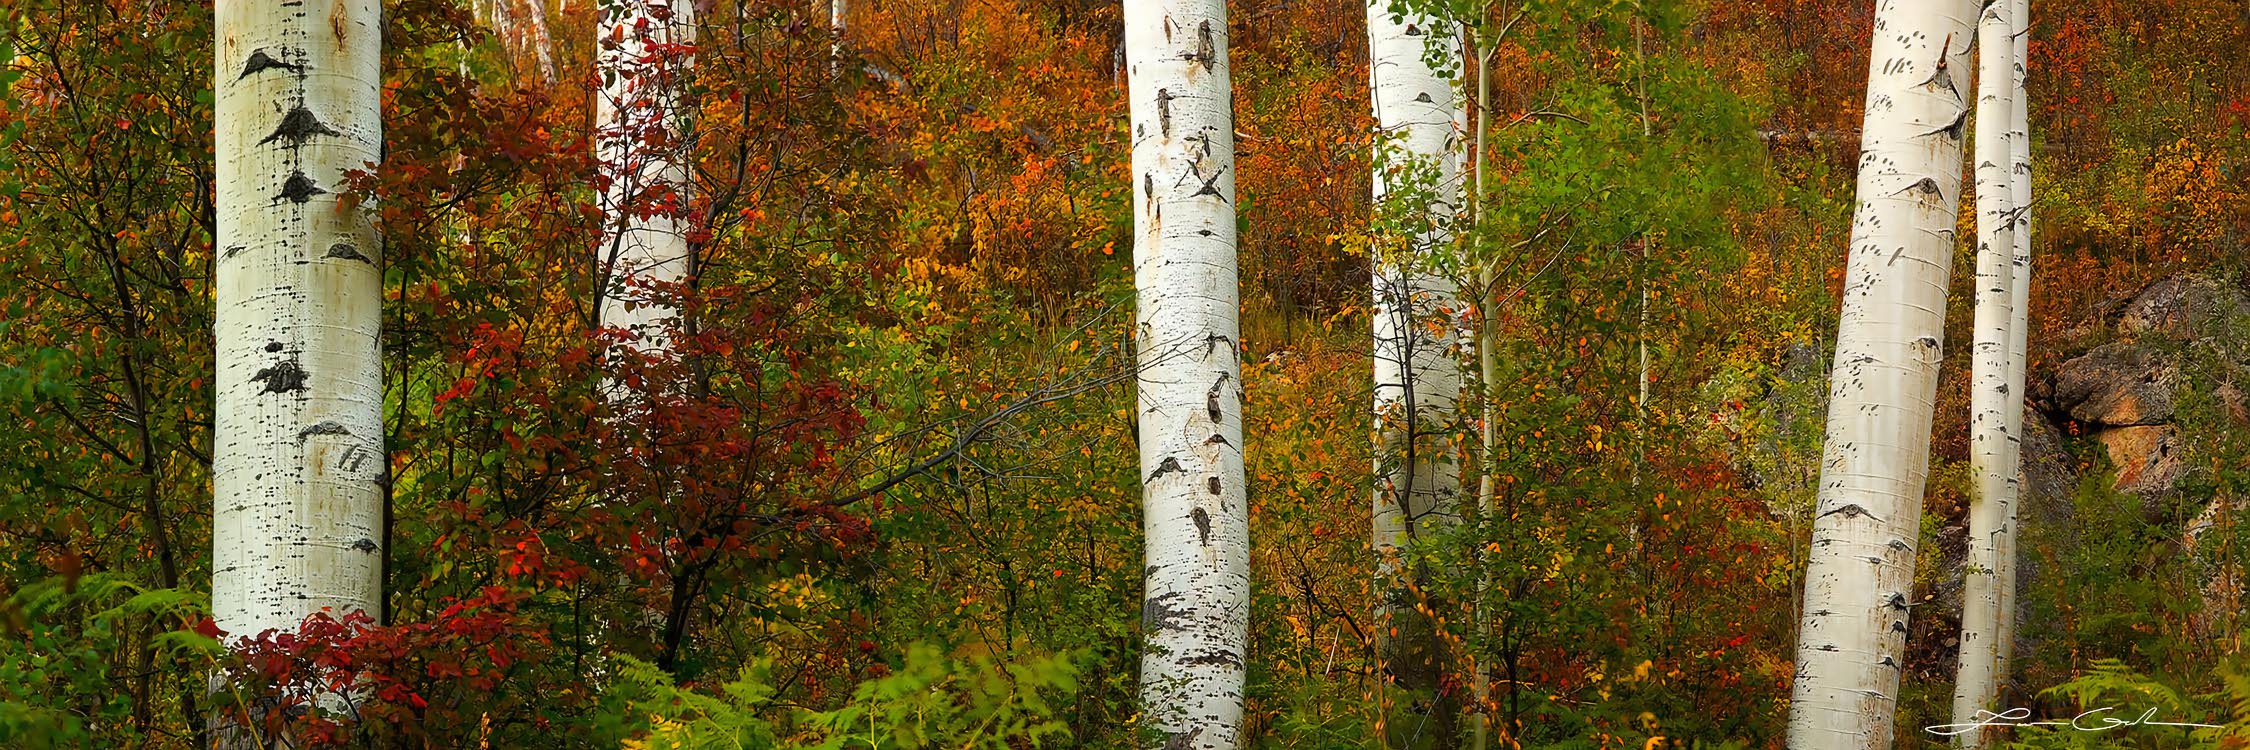 Fall color leaves and bushes with white aspen trunks